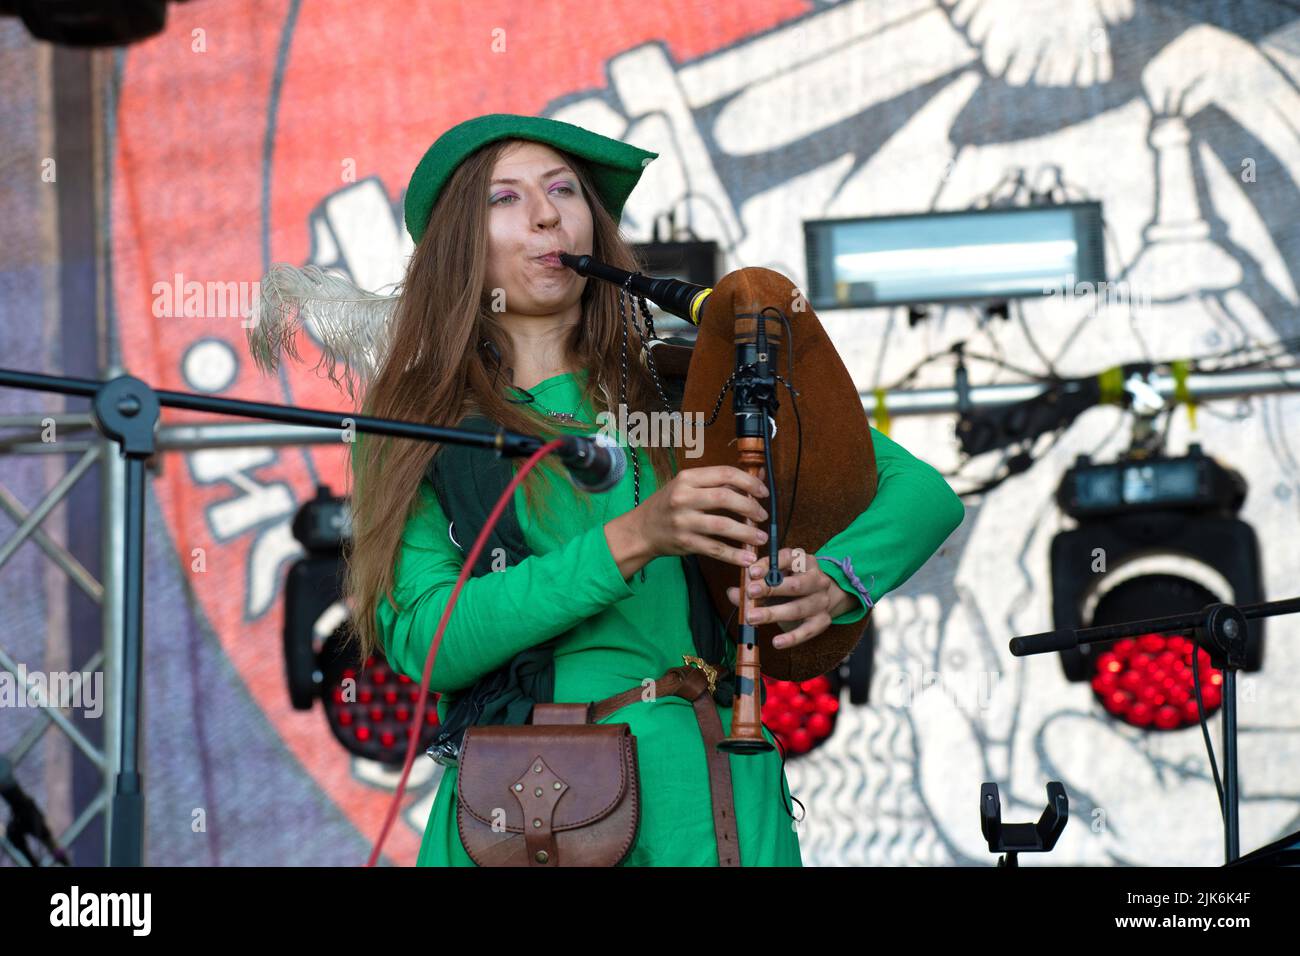 TVER REGION, RUSSIA - JULY 22, 2022: The piper girl of the folk group 'EL MENTAL' on the historical festival 'Epic Coast 2022' Stock Photo